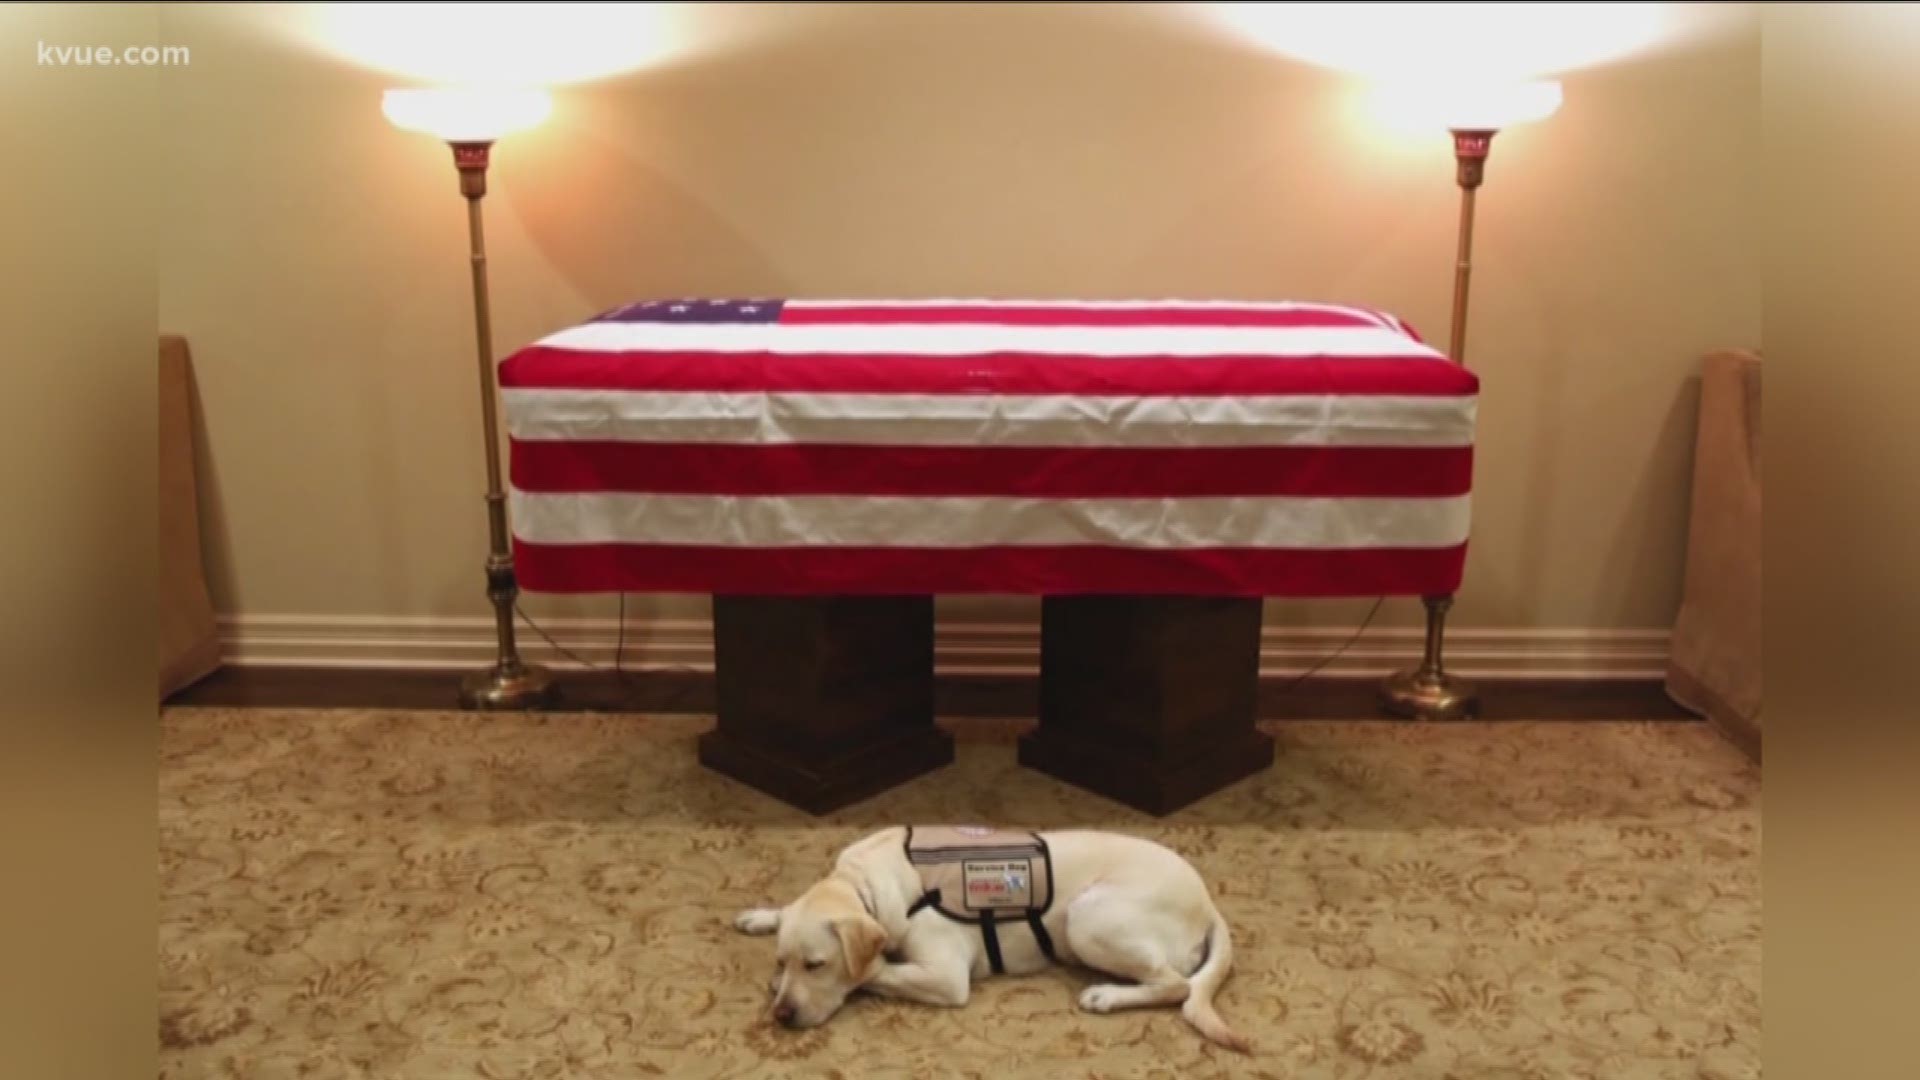 Service dogs, like George H.W. Bush's Sully, can leave a life-long impact on the people they help.